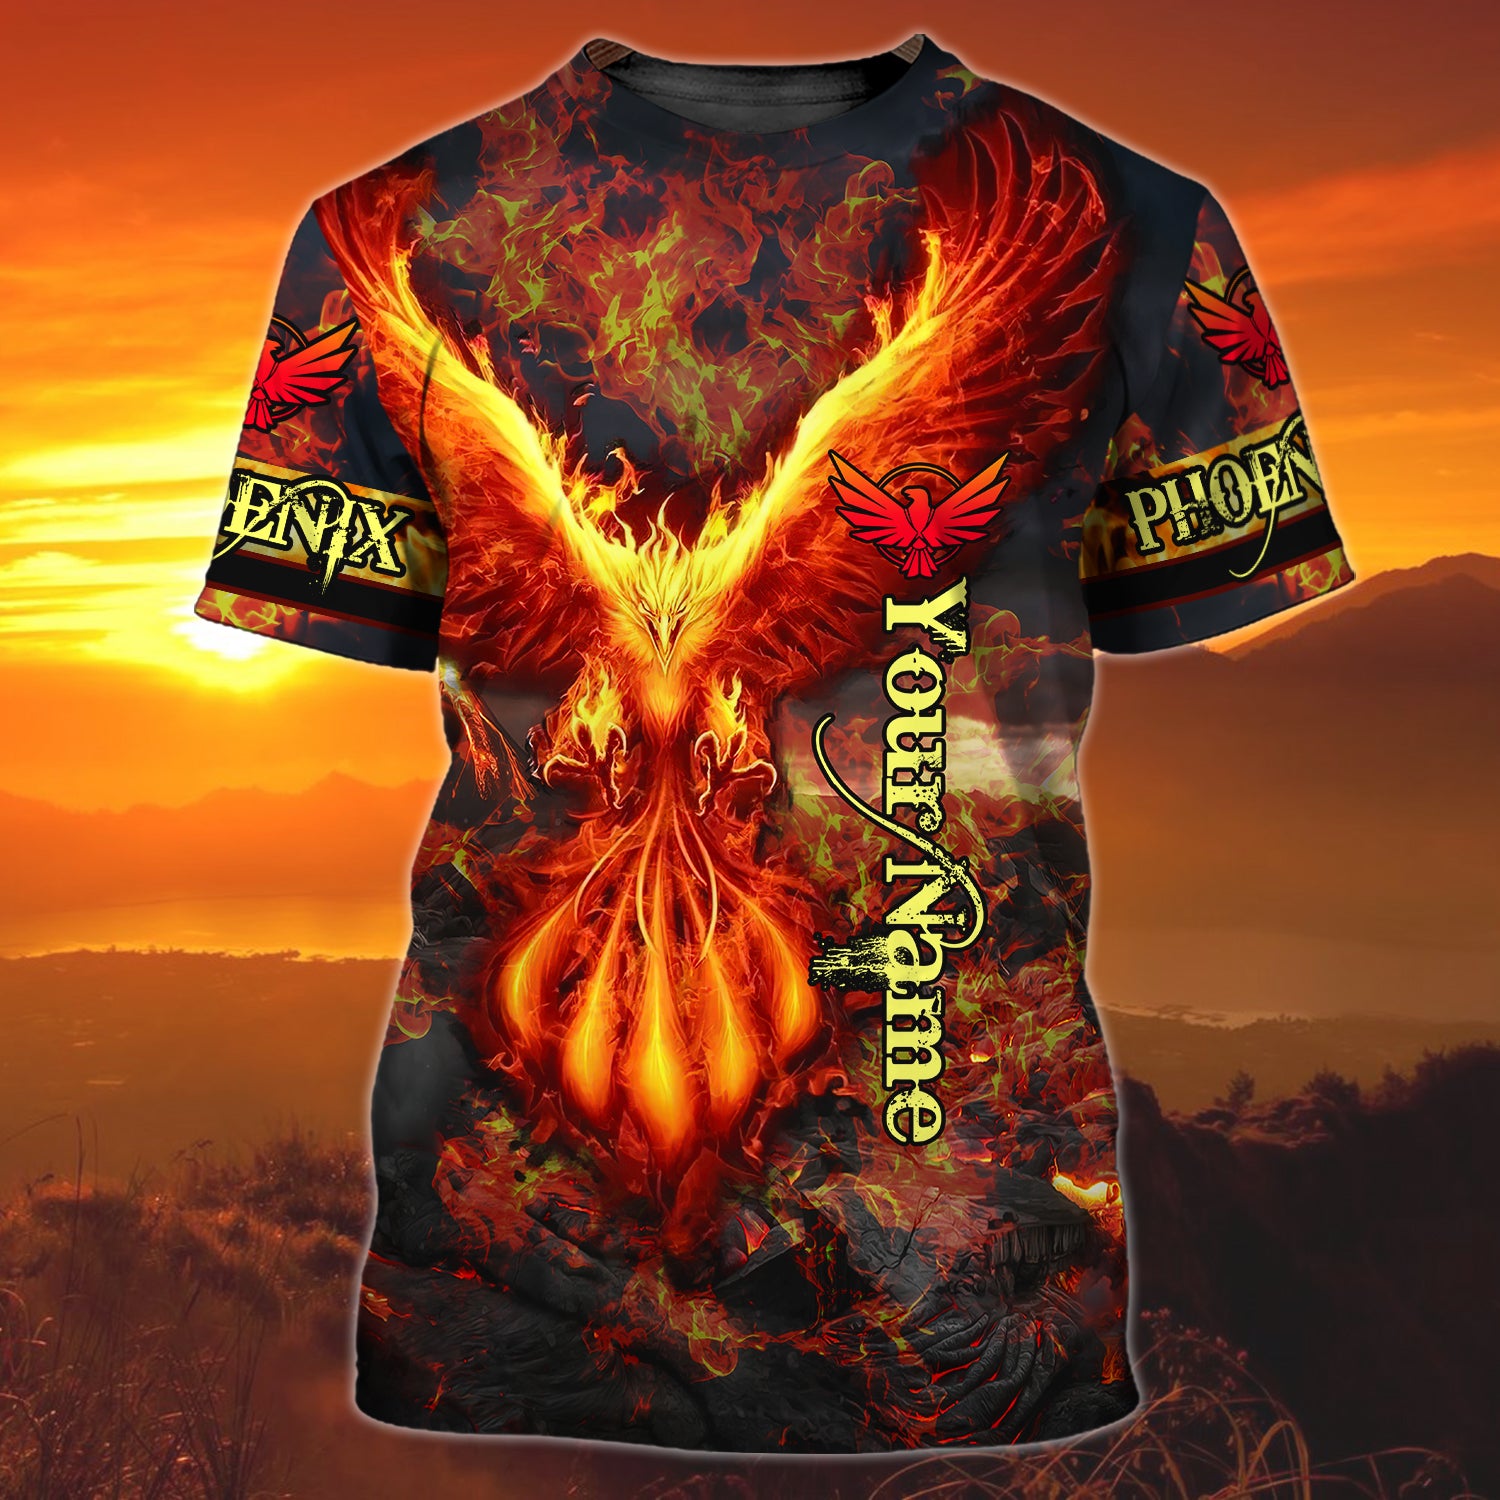 Phoenix Rise From The Ashes- Personalized Name 3D T Shirt - Nt168 - Ct074